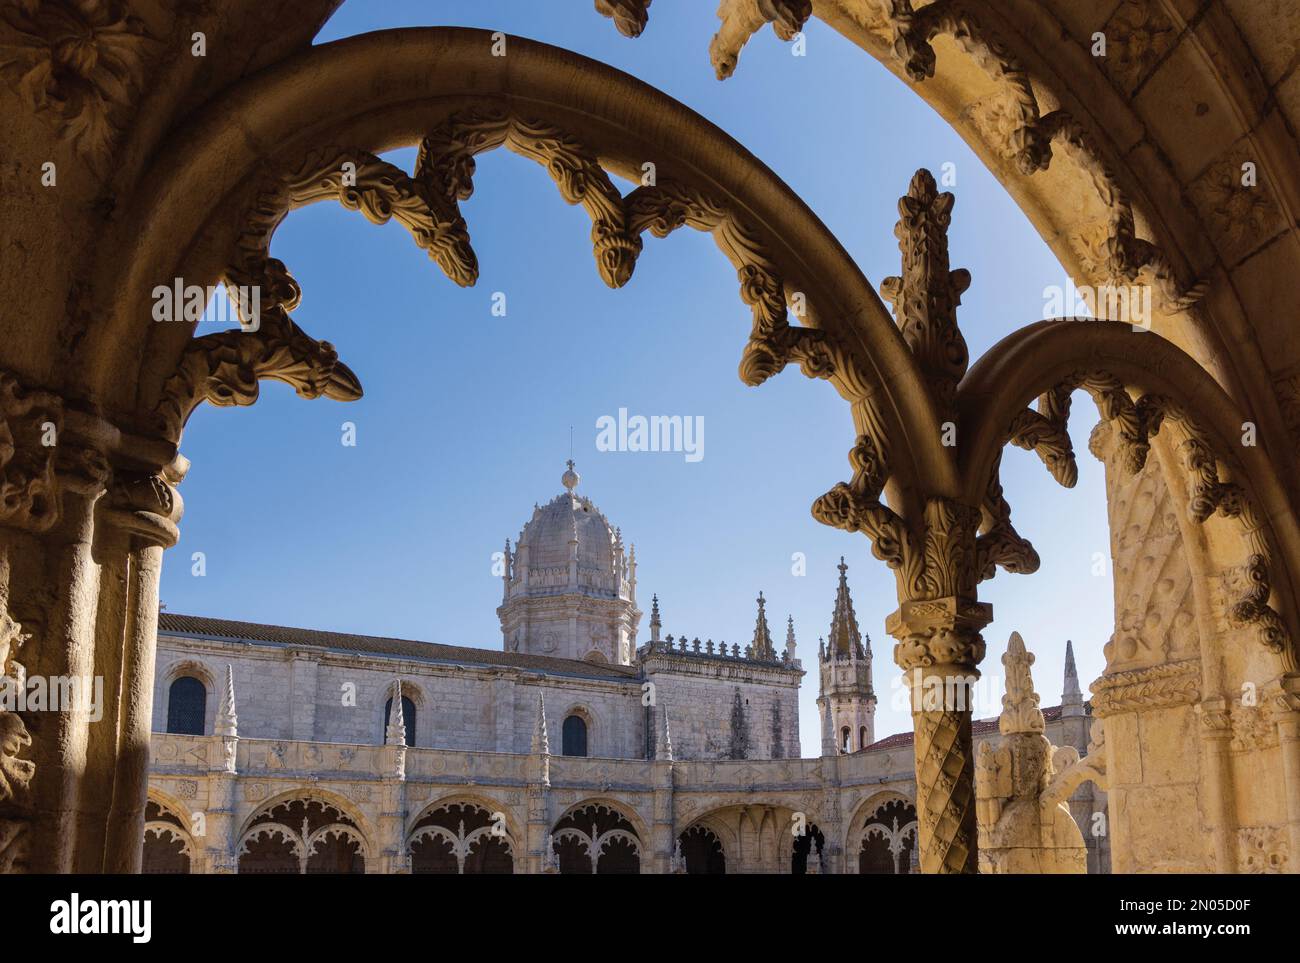 Lisbon, Portugal. The cloister of the Mosteiro dos Jeronimos/Monastery of the Hieronymites. The monastery is considered a triumph of Manueline archite Stock Photo